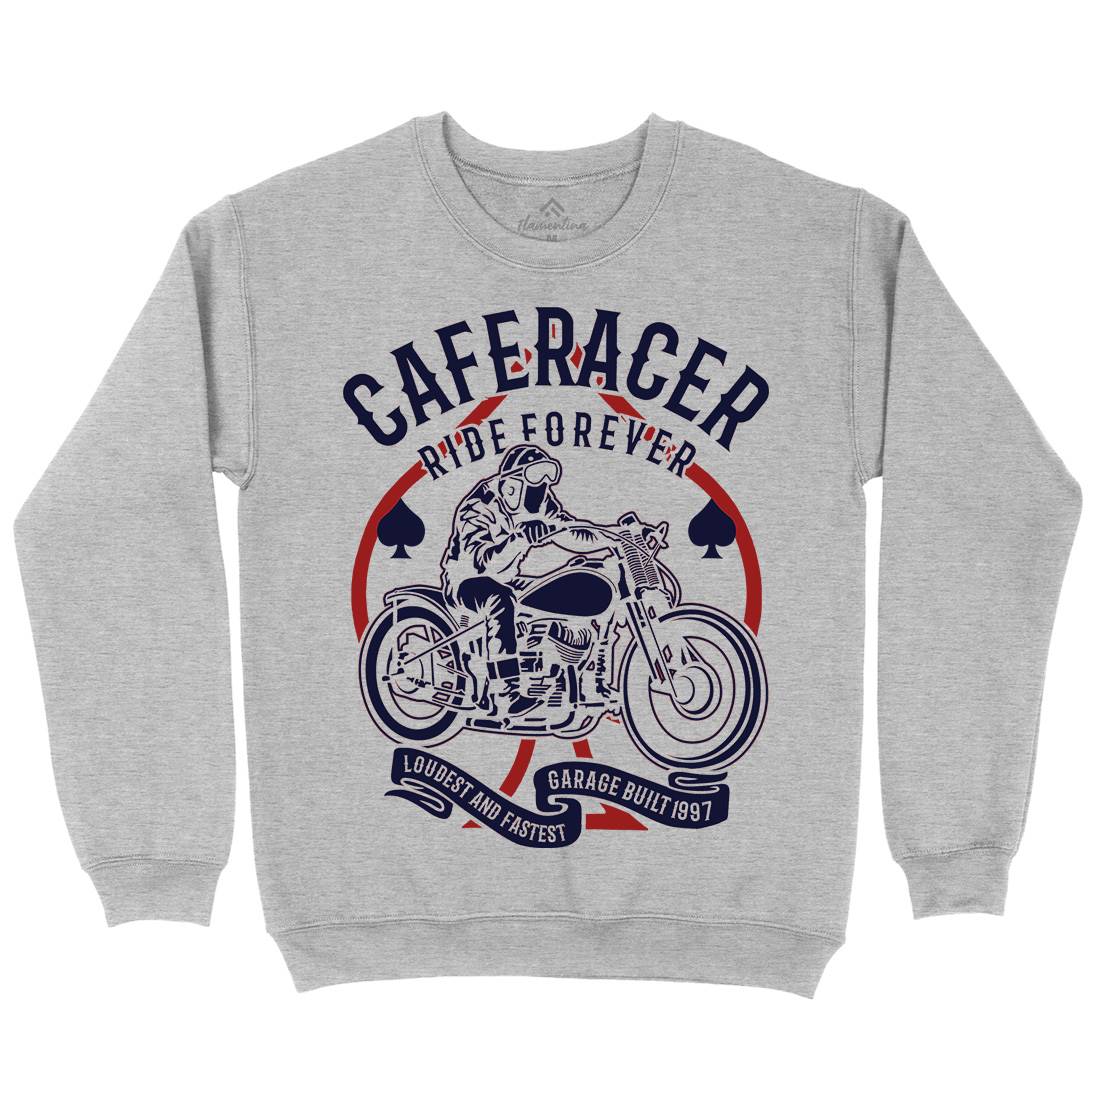 Caferacer Ride Forever Kids Crew Neck Sweatshirt Motorcycles B192